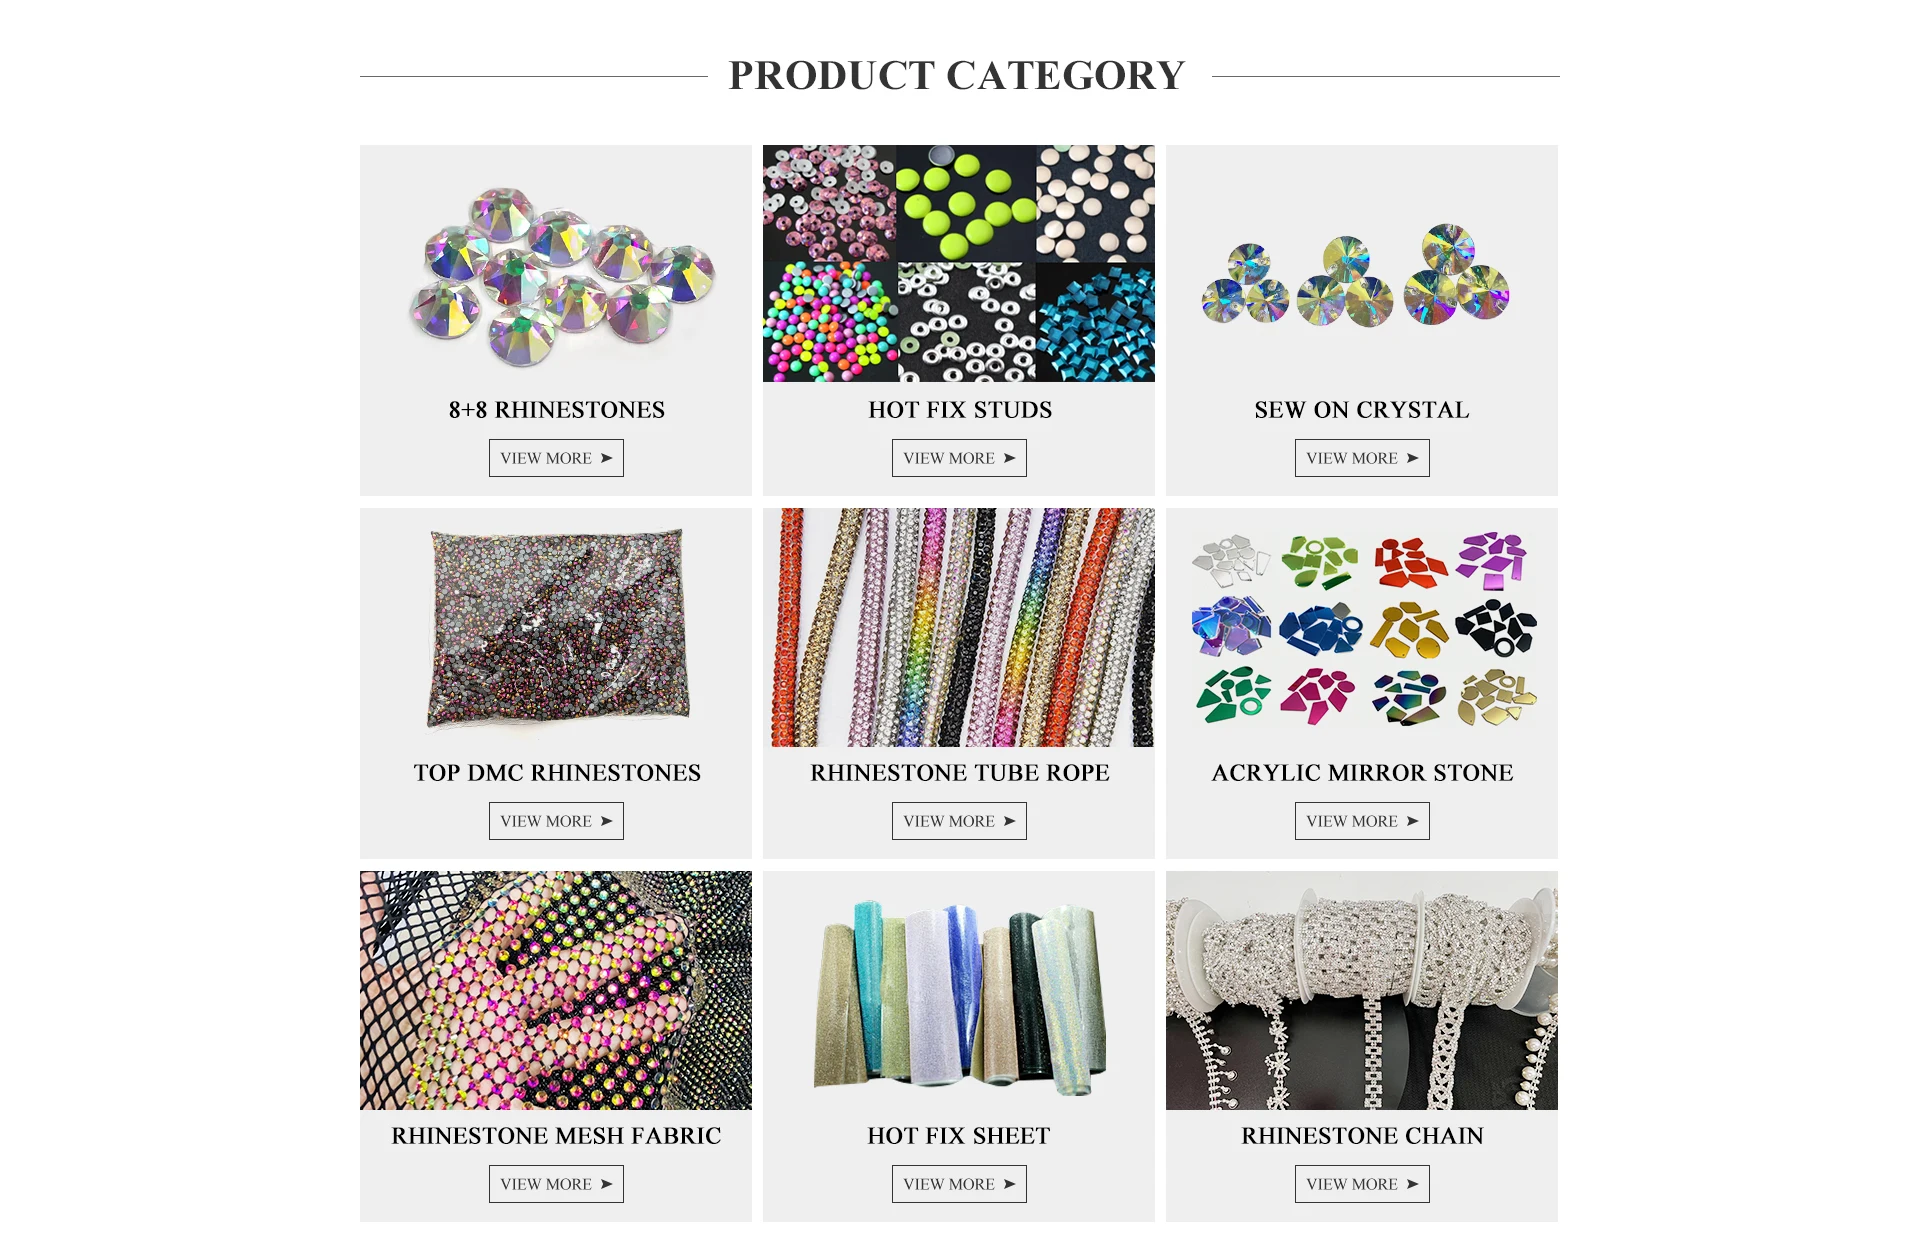 Guangzhou Lucky Garment Limited - Nailart Crystal, Sew on Crystal